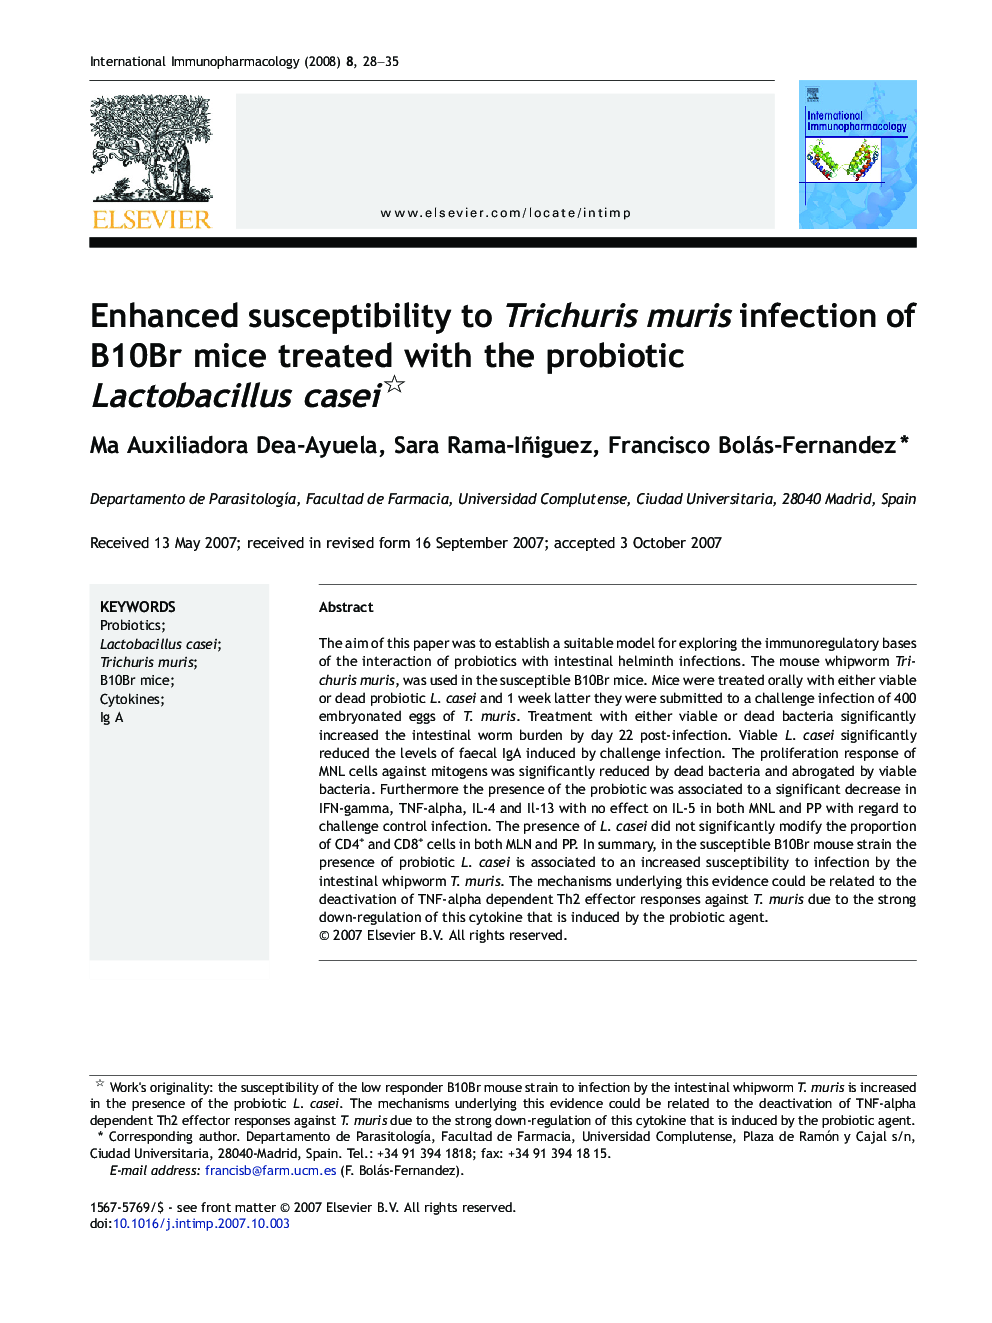 Enhanced susceptibility to Trichuris muris infection of B10Br mice treated with the probiotic Lactobacillus casei 